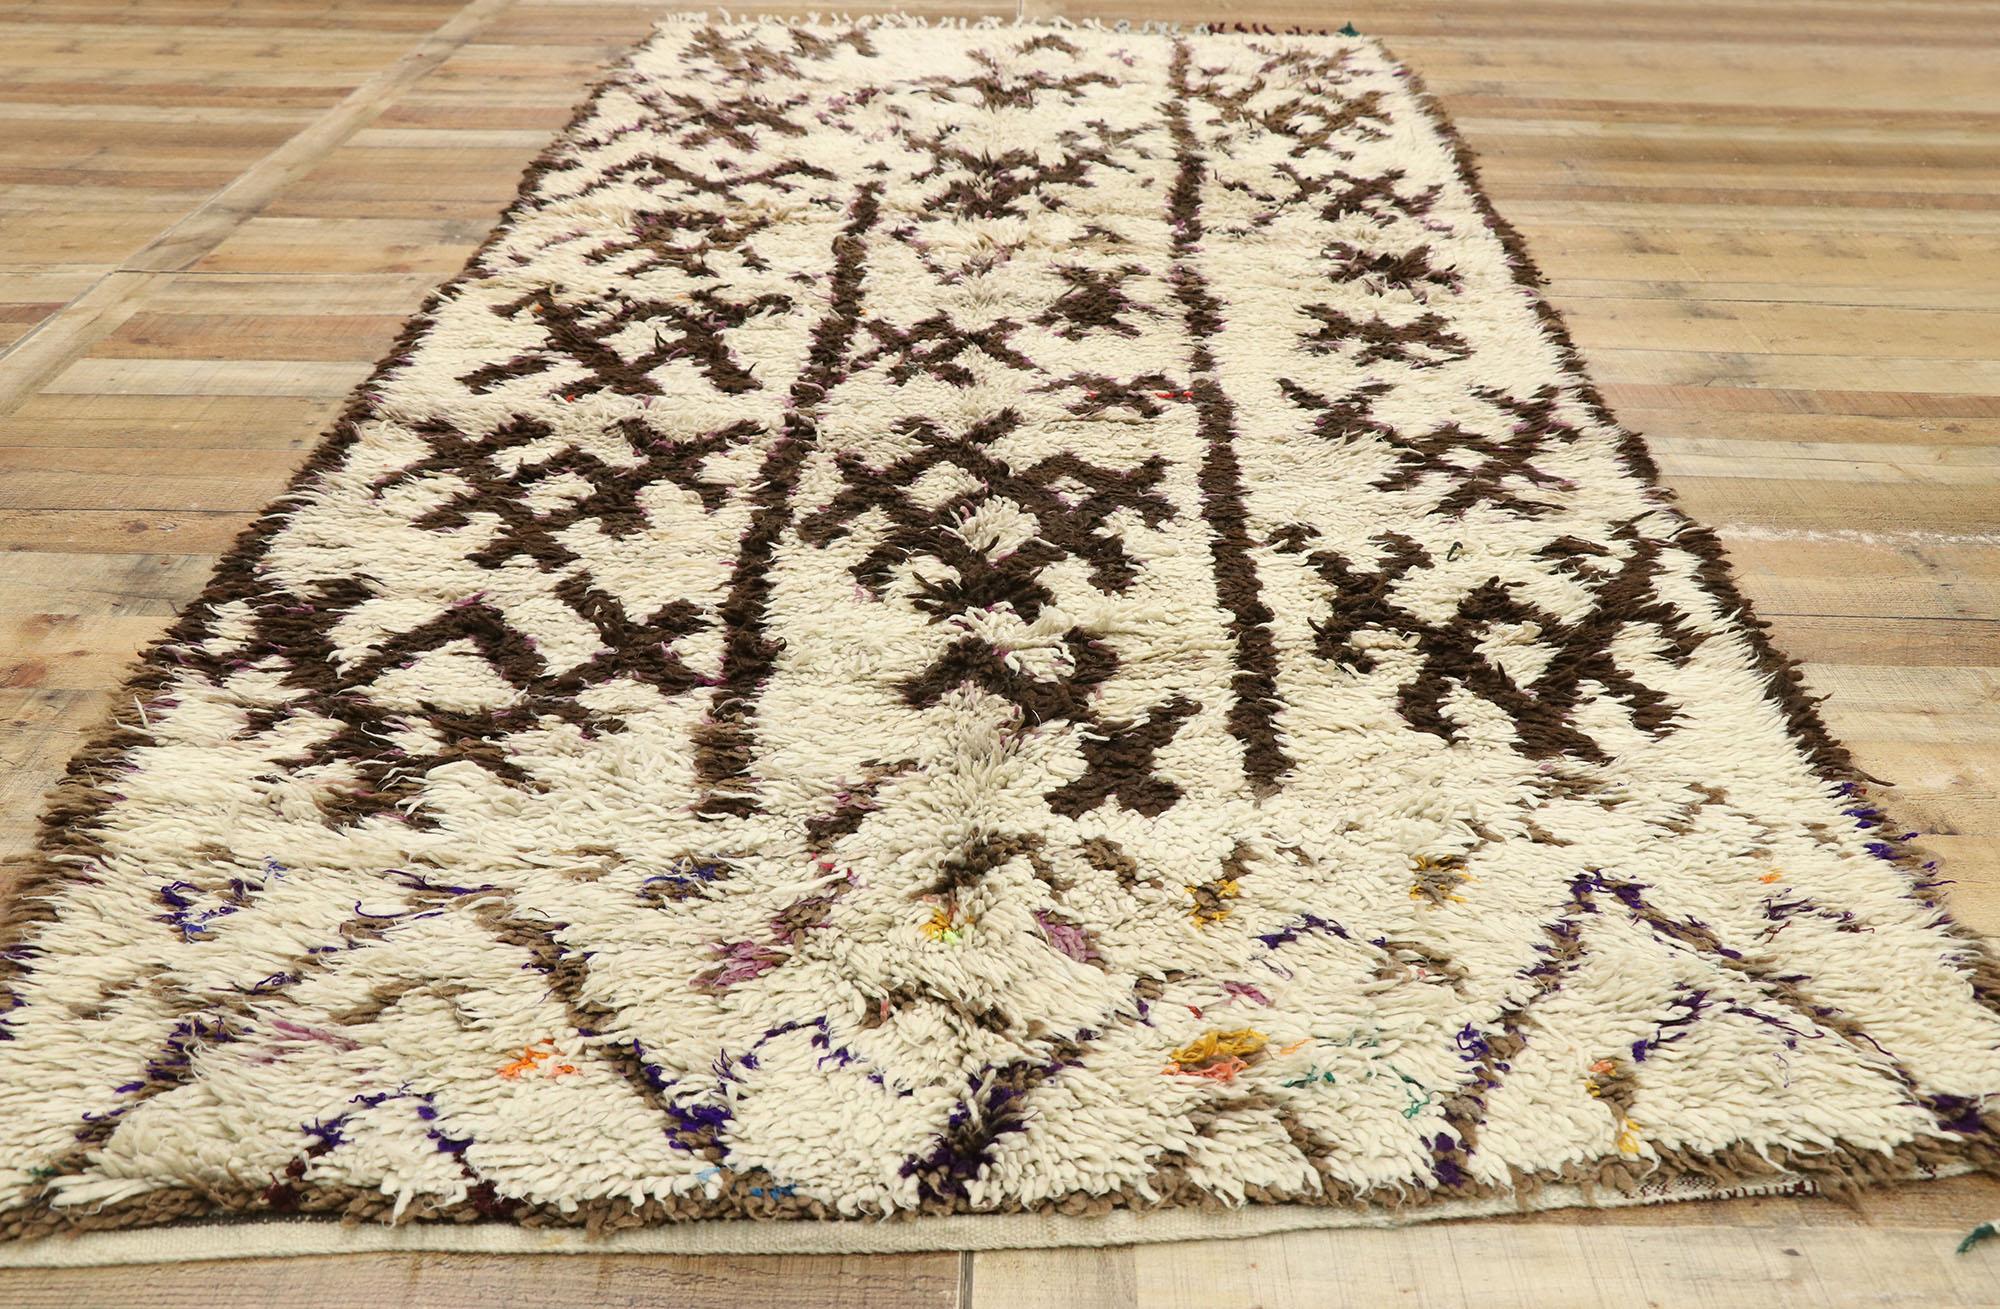 Wool Vintage Berber Moroccan Azilal Rug with Boho Chic Tribal Style For Sale